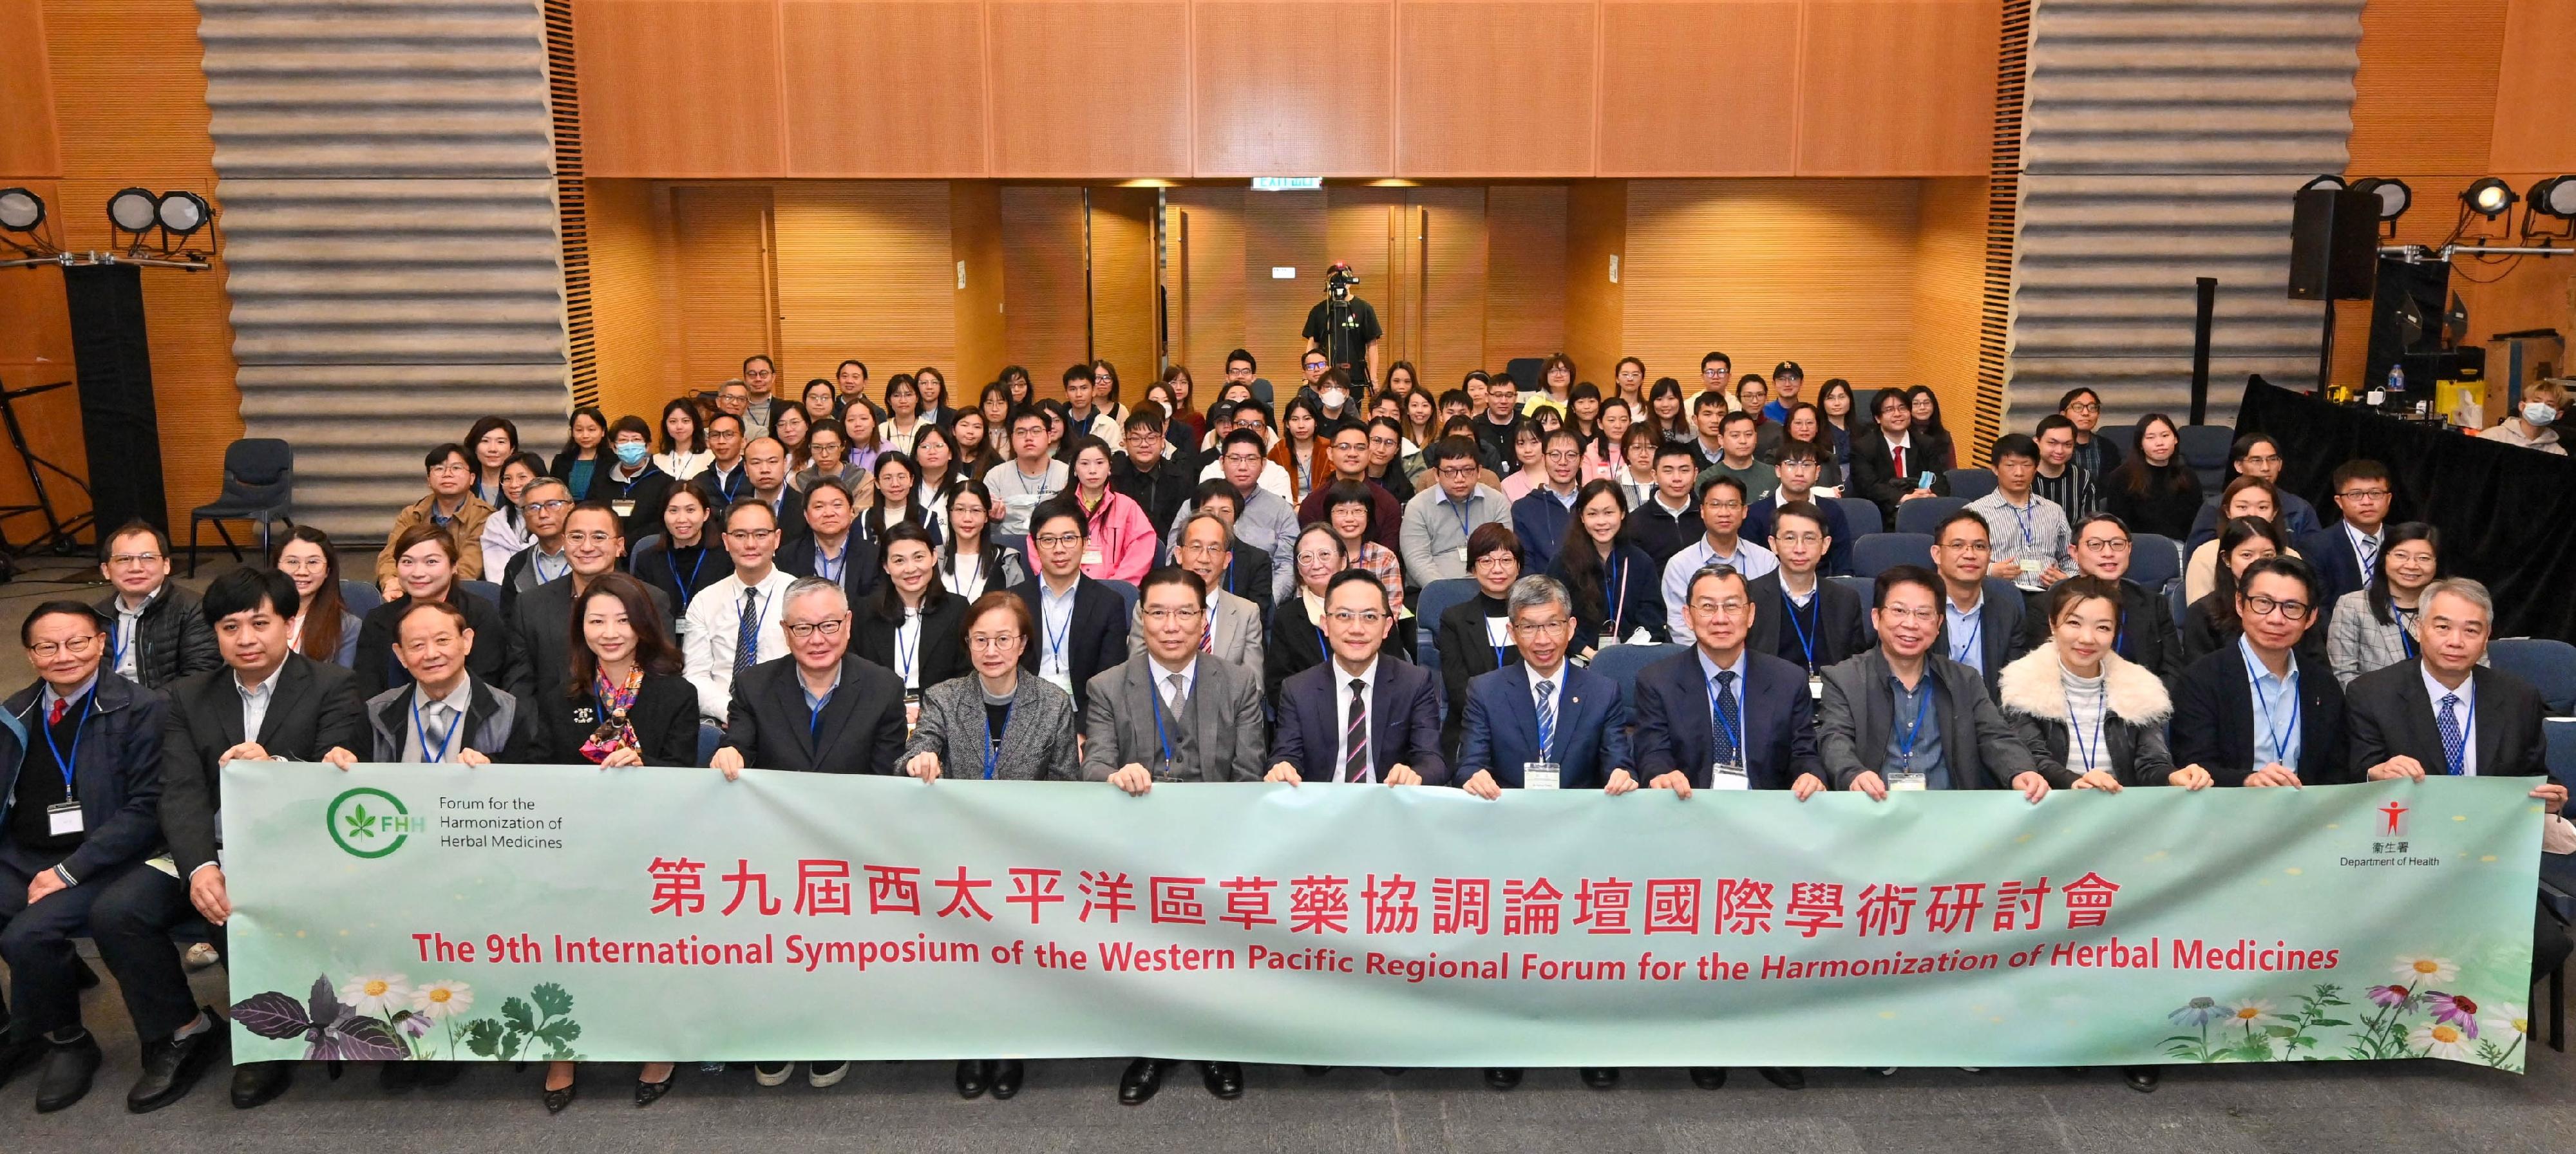 Hosted by the Department of Health (DH), a two-day event comprising the 20th Standing Committee Meeting and the 9th International Symposium of the Western Pacific Regional Forum for the Harmonization of Herbal Medicines, successfully concluded today (February 23). The Director of Health, Dr Ronald Lam (front row, seventh right); the Controller of Regulatory Affairs of the DH, Dr Amy Chiu (front row, sixth left); the Director of Cluster Services of the Hospital Authority, Dr Simon Tang (front row, sixth right); the Convenor of Chinese Herbal Medicines Task Force of Advisory Committee of the Government Chinese Medicines Testing Institute (GCMTI), Mr Tommy Li (front row, seventh left); the Convenor of Proprietary Chinese Medicines Task Force of Advisory Committee of the GCMTI, Mr Kenlay Wong (front row, fifth right), and other participants are pictured before the Symposium.